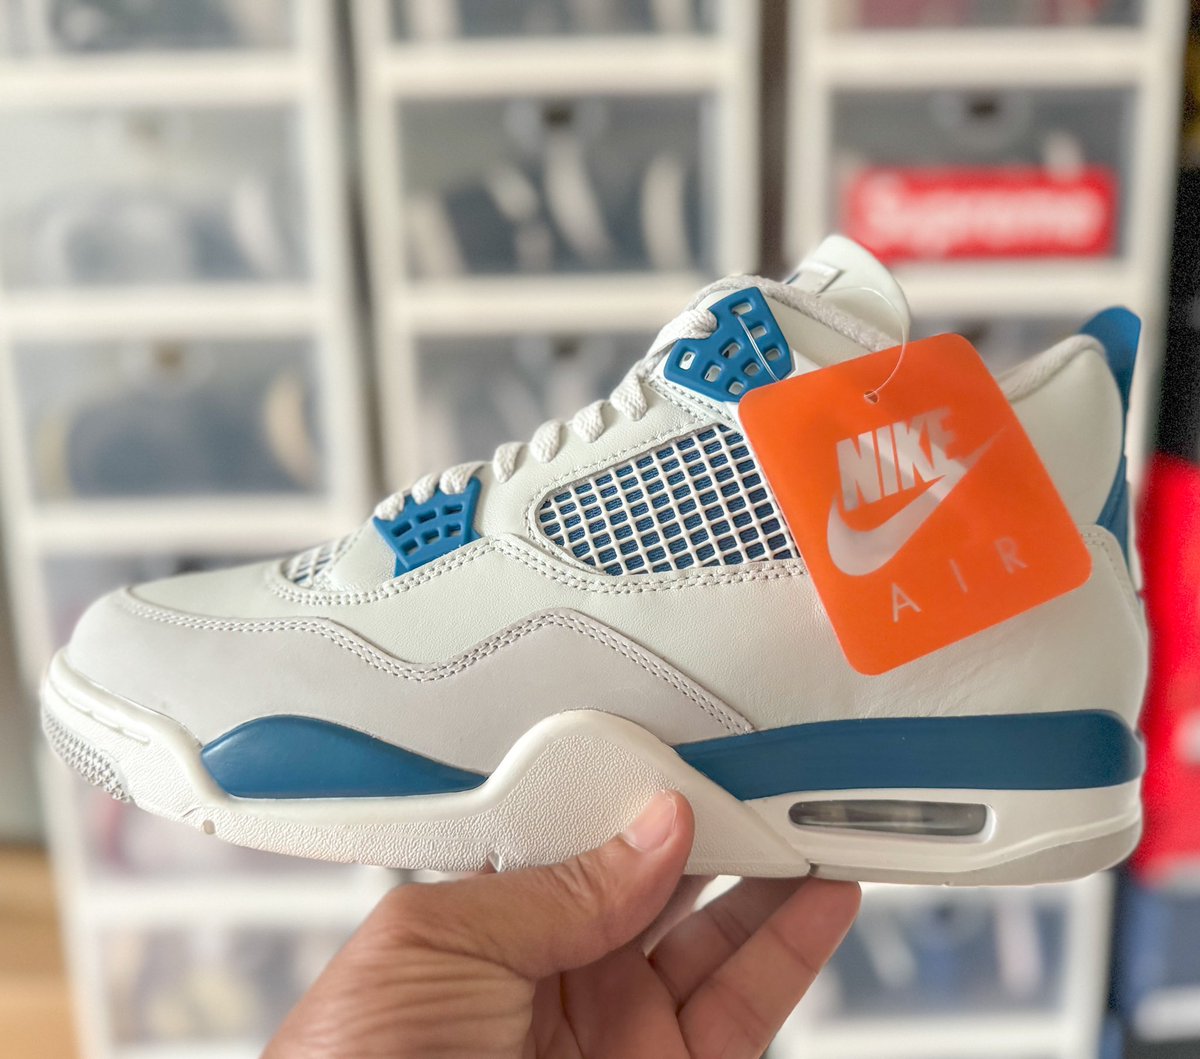 Now that pairs are in hand, contrary to belief…..I think that the Jordan 4 Military Blue is one of the brands best retro’s ever done imho. Well executed @Nike @Jumpman23 BRAVO‼️🗣️